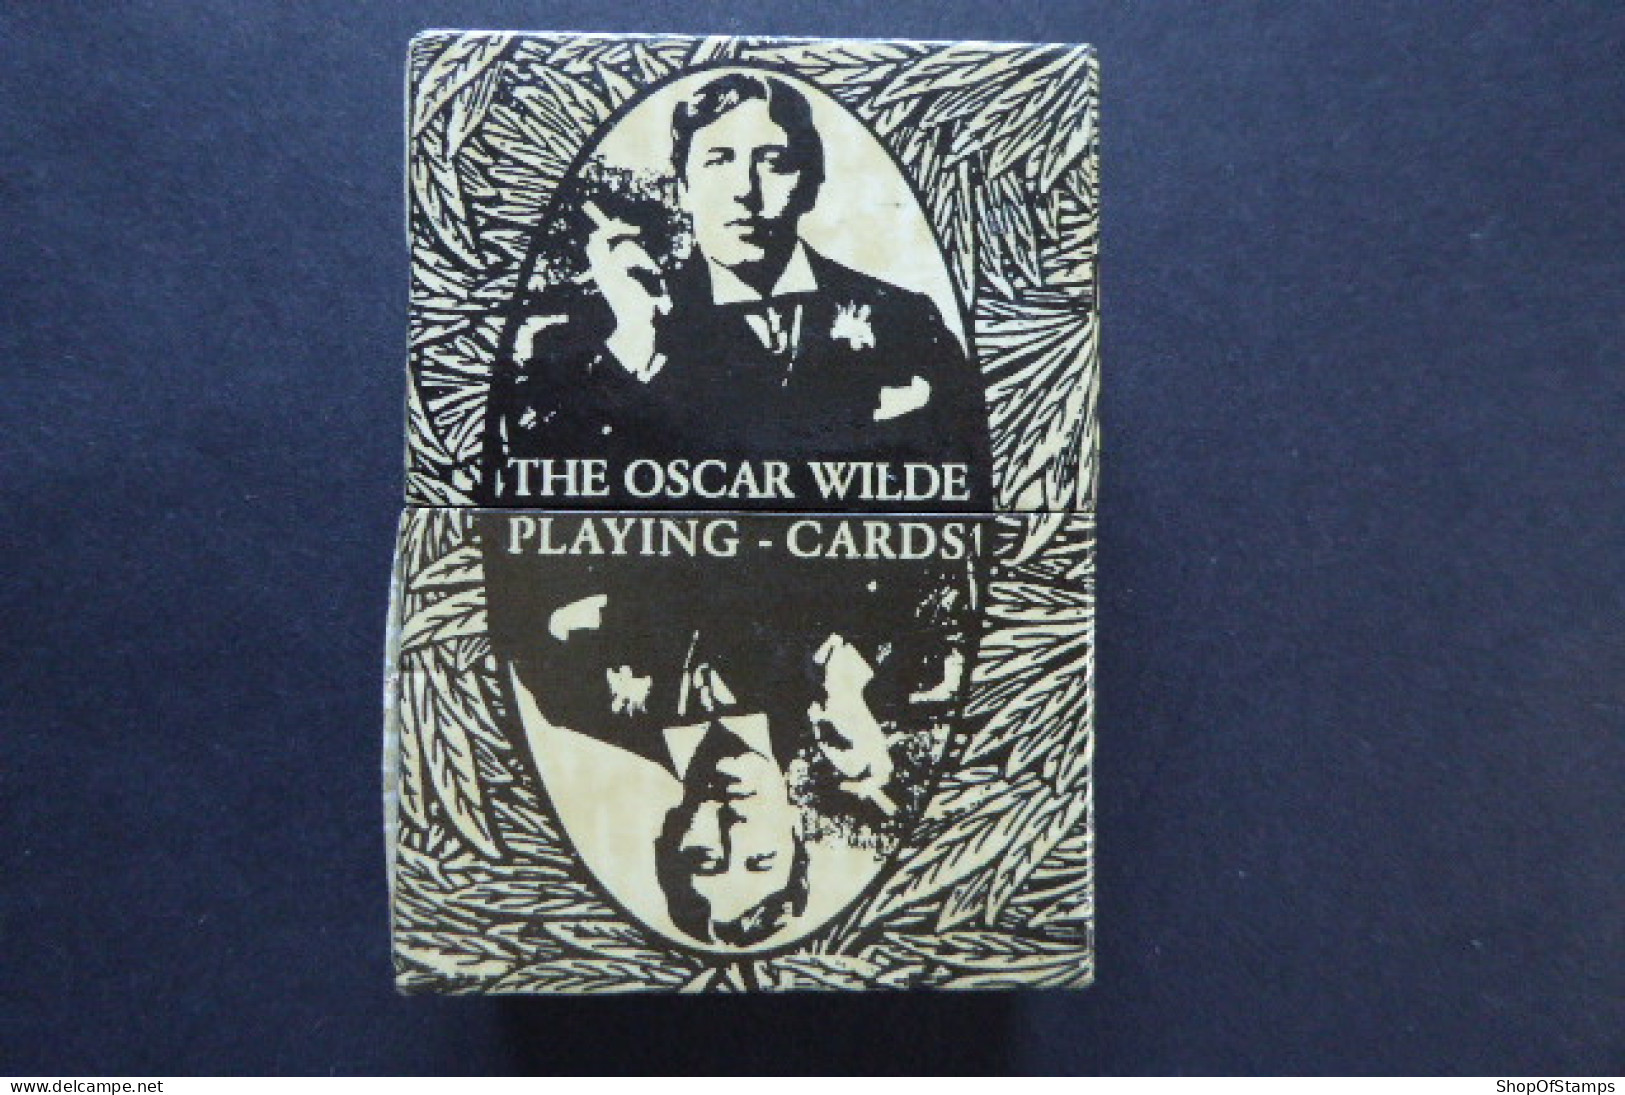 CARDS: OSCAR WILDE PLAYING CARDS BY RICHARD ELLMANN & R FANTO PACKED WITH CASE AND LEAFLET - Carte Di Casinò